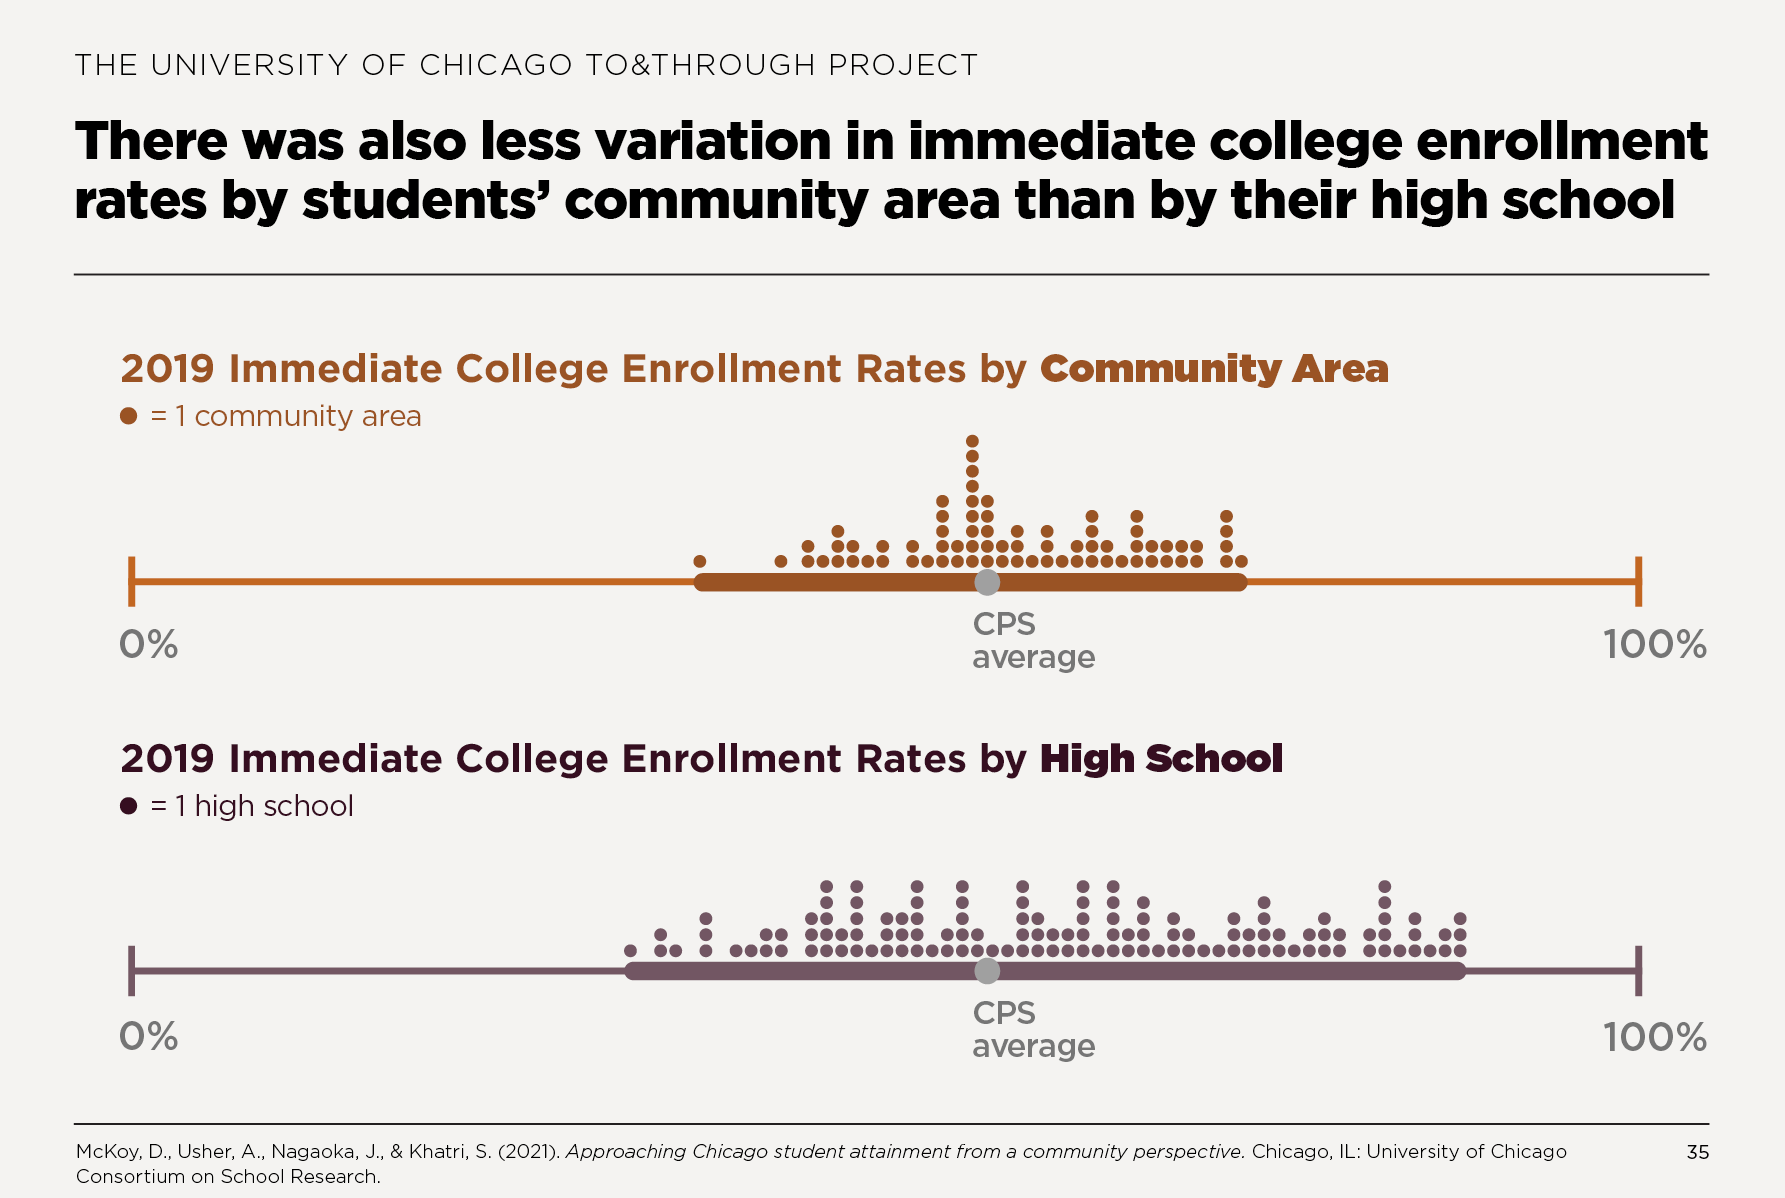 There was also less variation in immediate college enrollment rates by students’ community area than by their high school